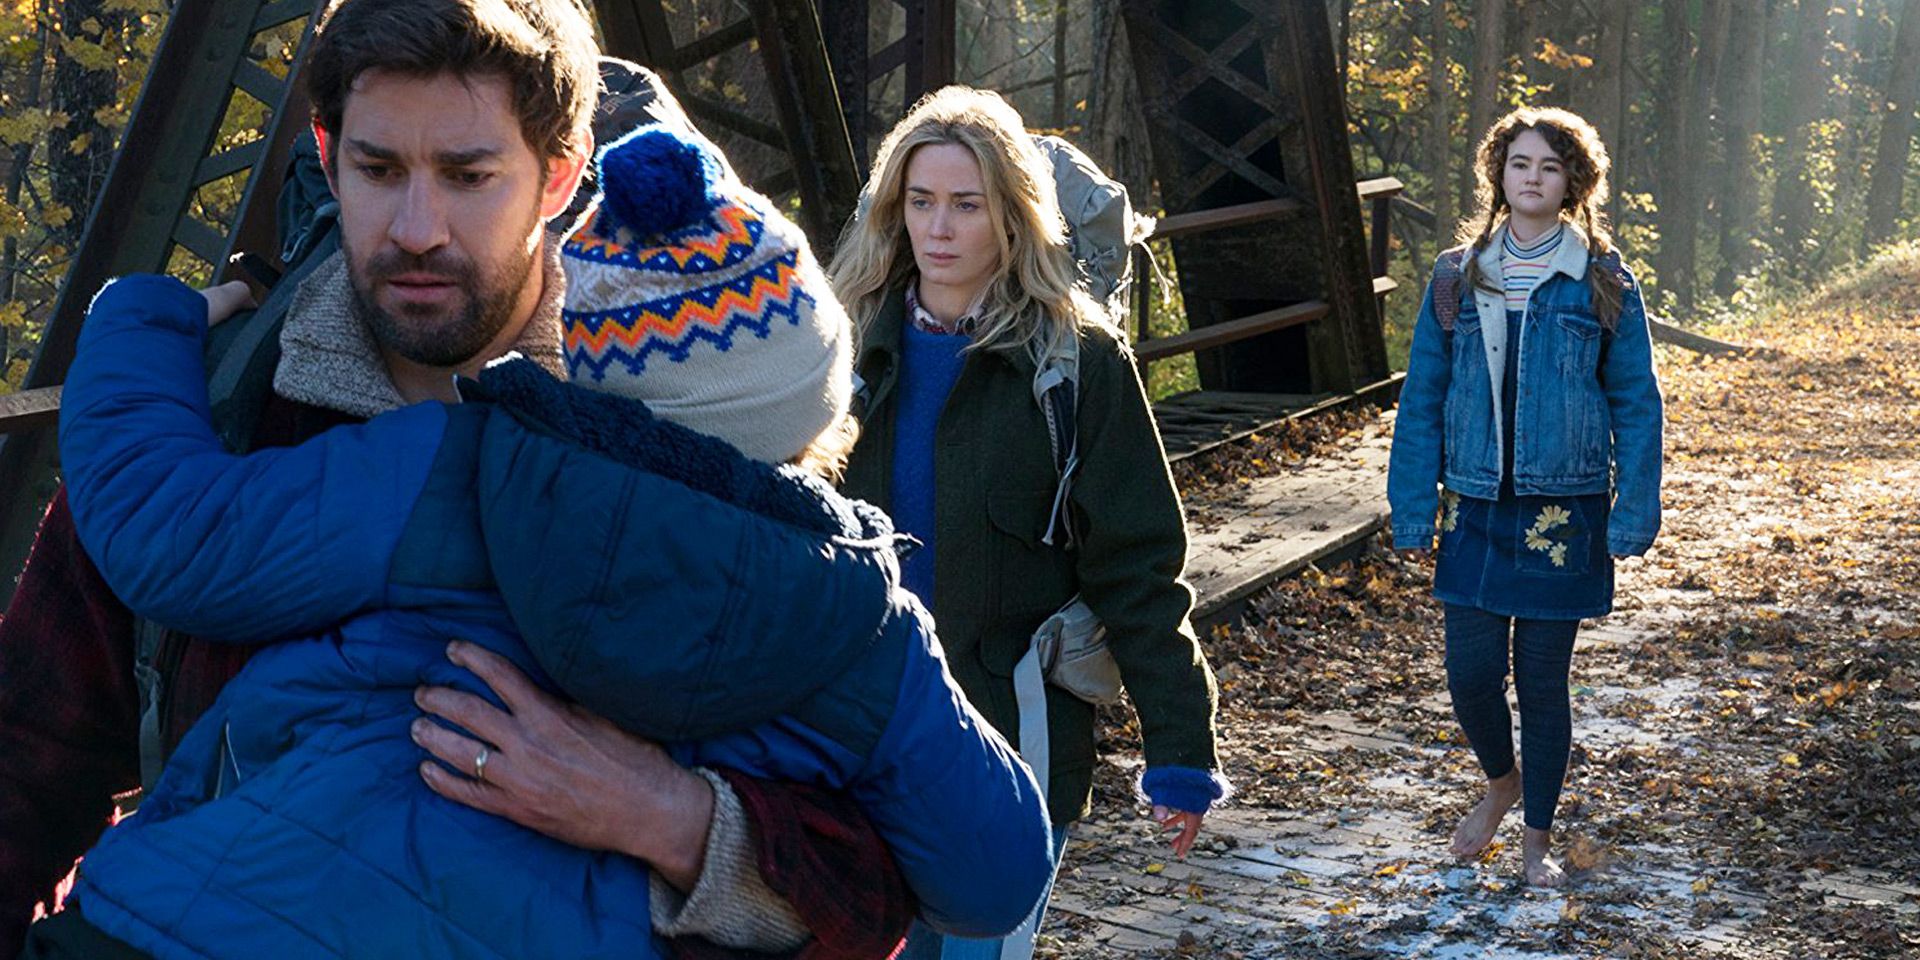 Characters from A Quiet Place walking through a woods